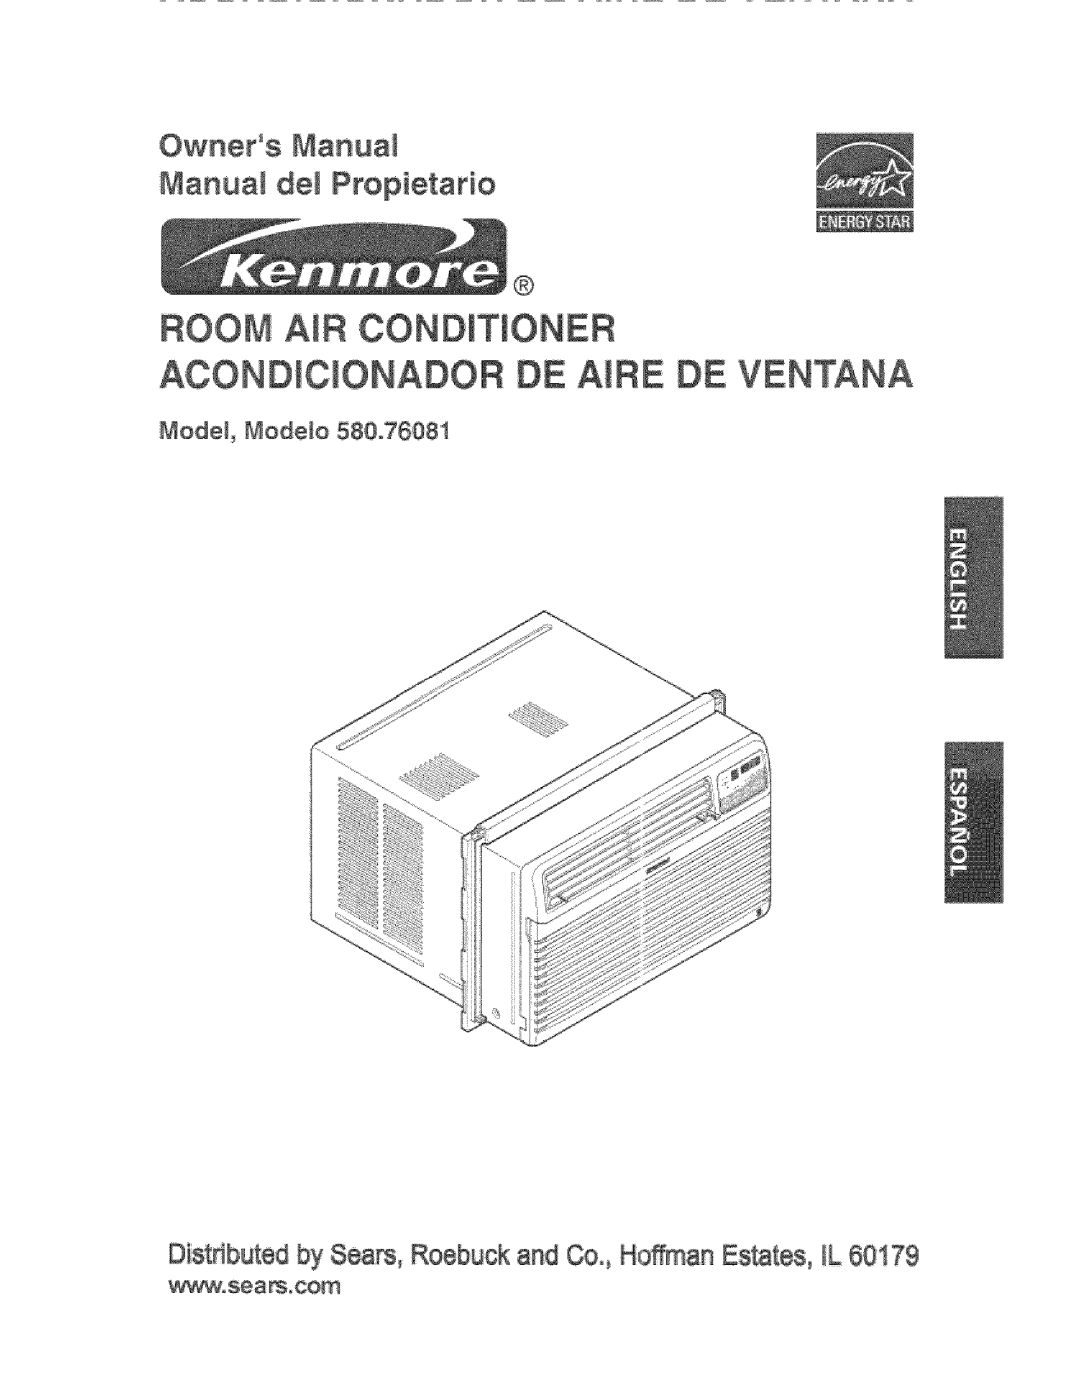 Kenmore 580.76081 manual ROOM AiR CONDm, OwnerS Manua_, Distributed by Sea_, Roebuok and Co,, H, an Es_tes, IL 6017g 